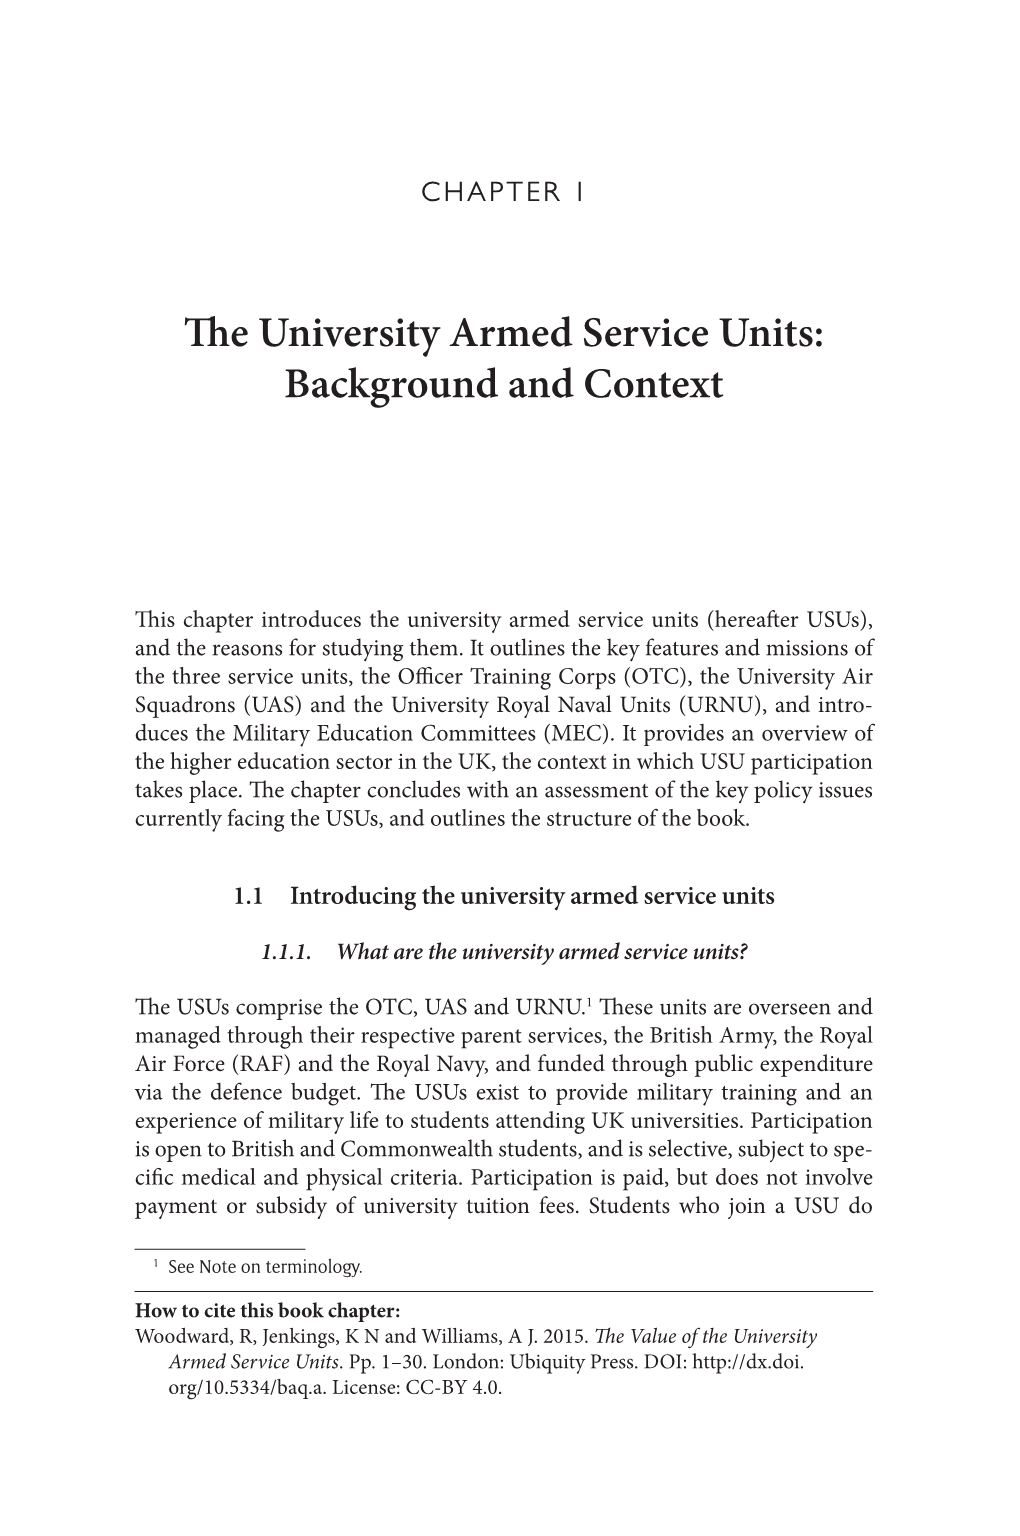 The University Armed Service Units: Background and Context